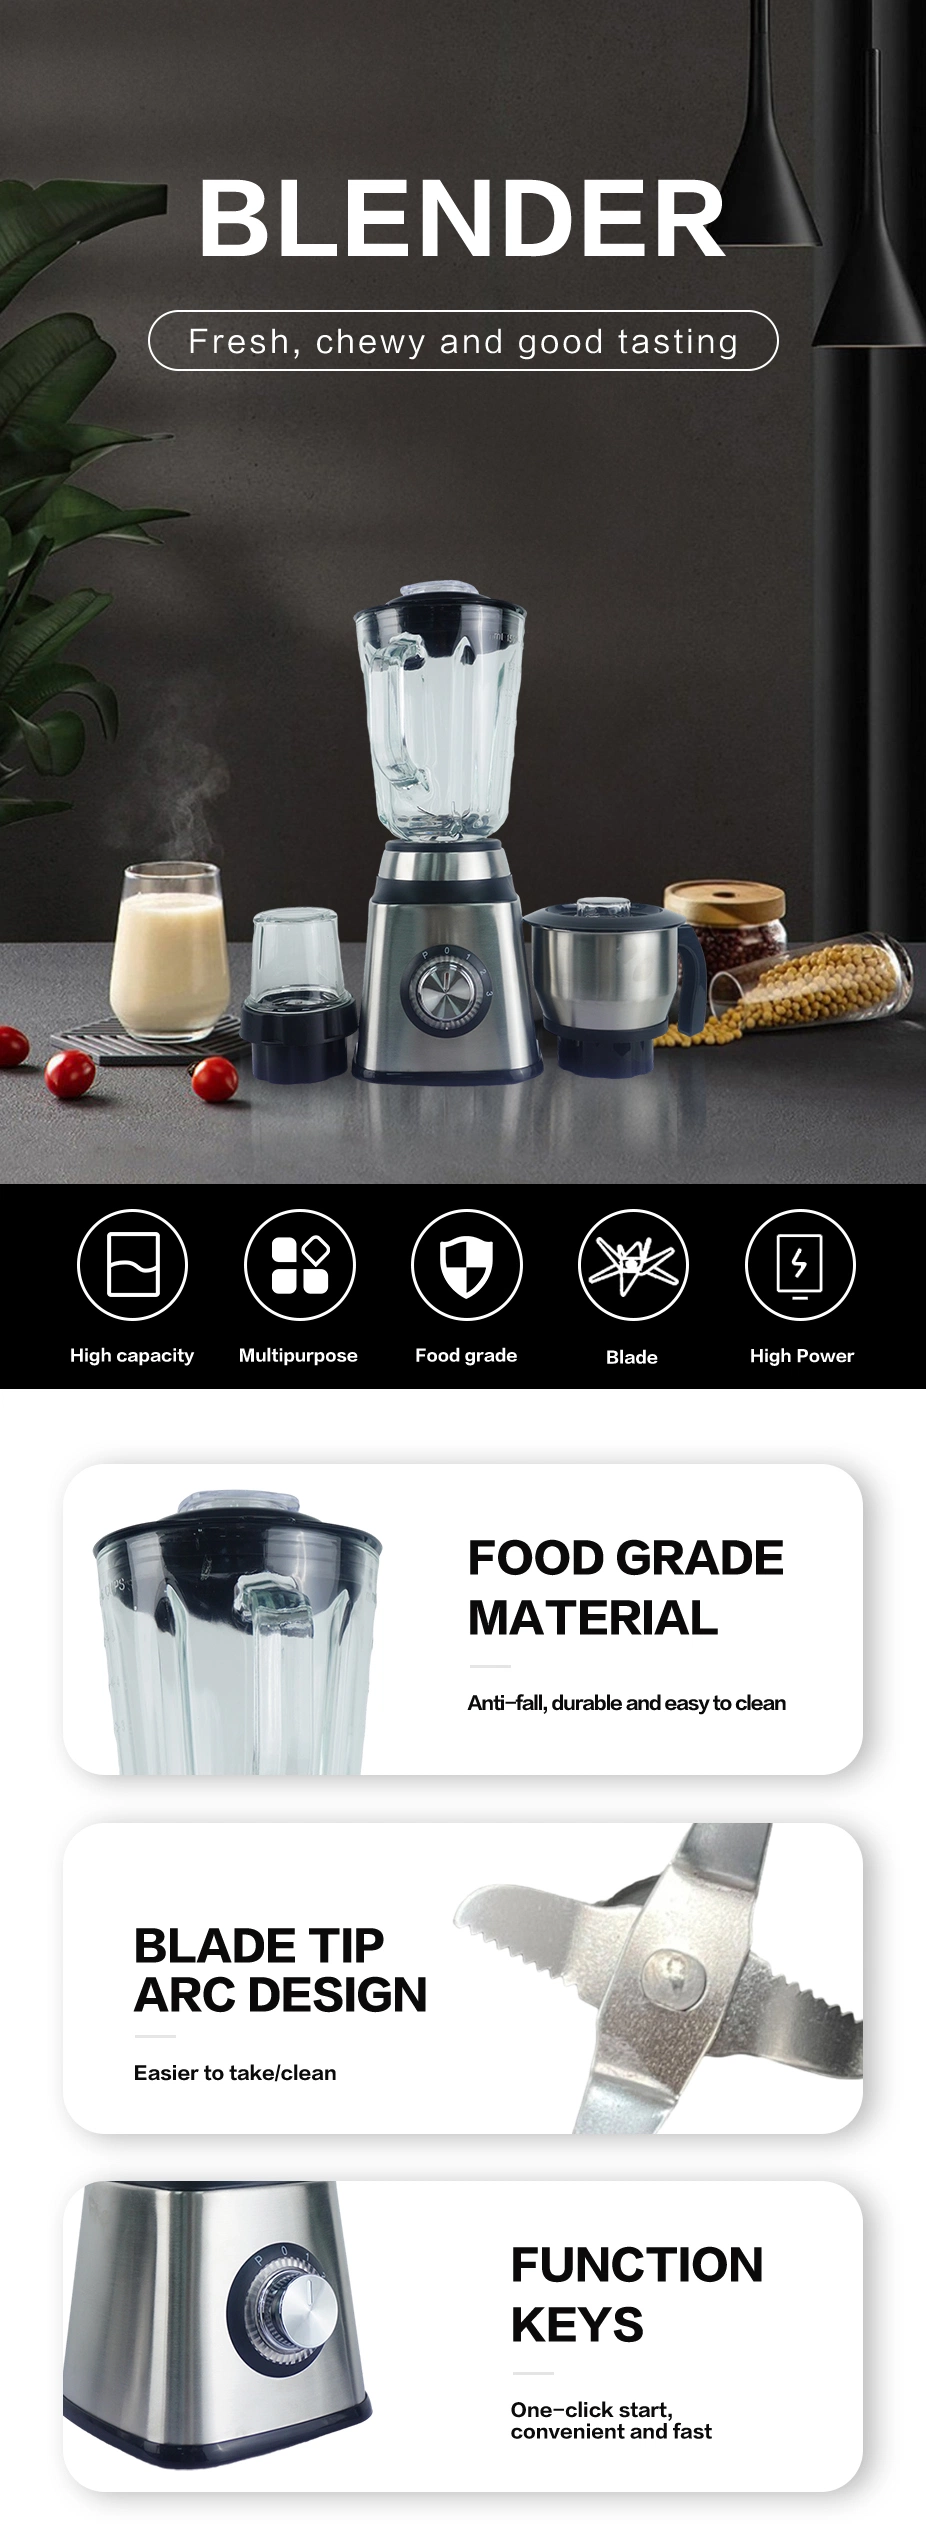 Portable Smoothie Kitchen Silver Crest Milkshake Heavy Duty Commercial Mini Food Electric Grinder Stainless Steel 1.8L Fresh Juice Blender with Chopper